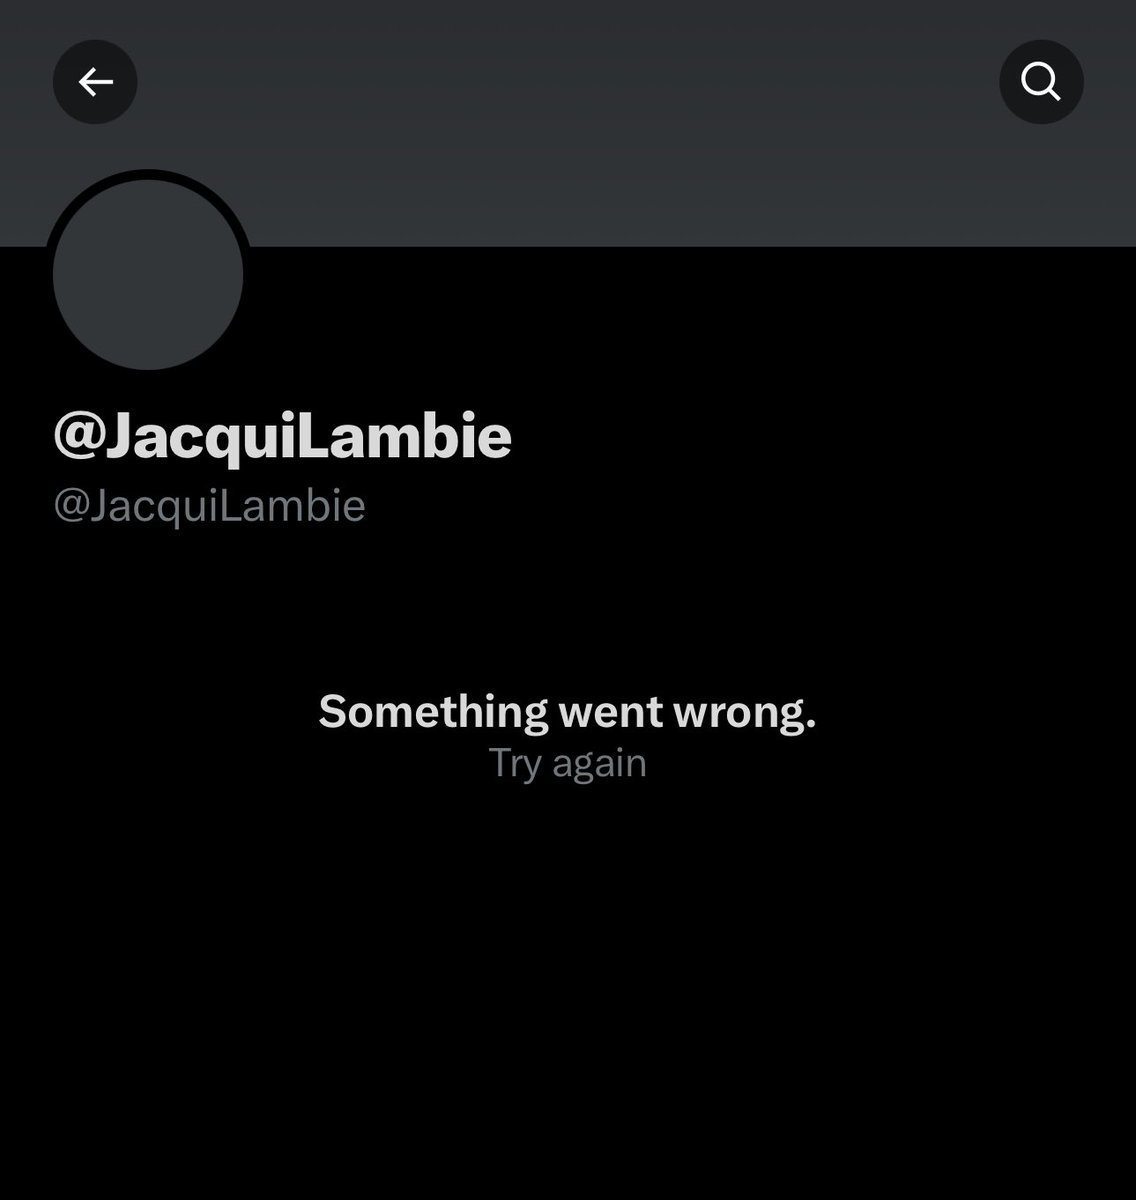 @CollinRugg Australian Senator Jacqui Lambie appears to have deleted her 𝕏 account after criticizing Elon Musk.